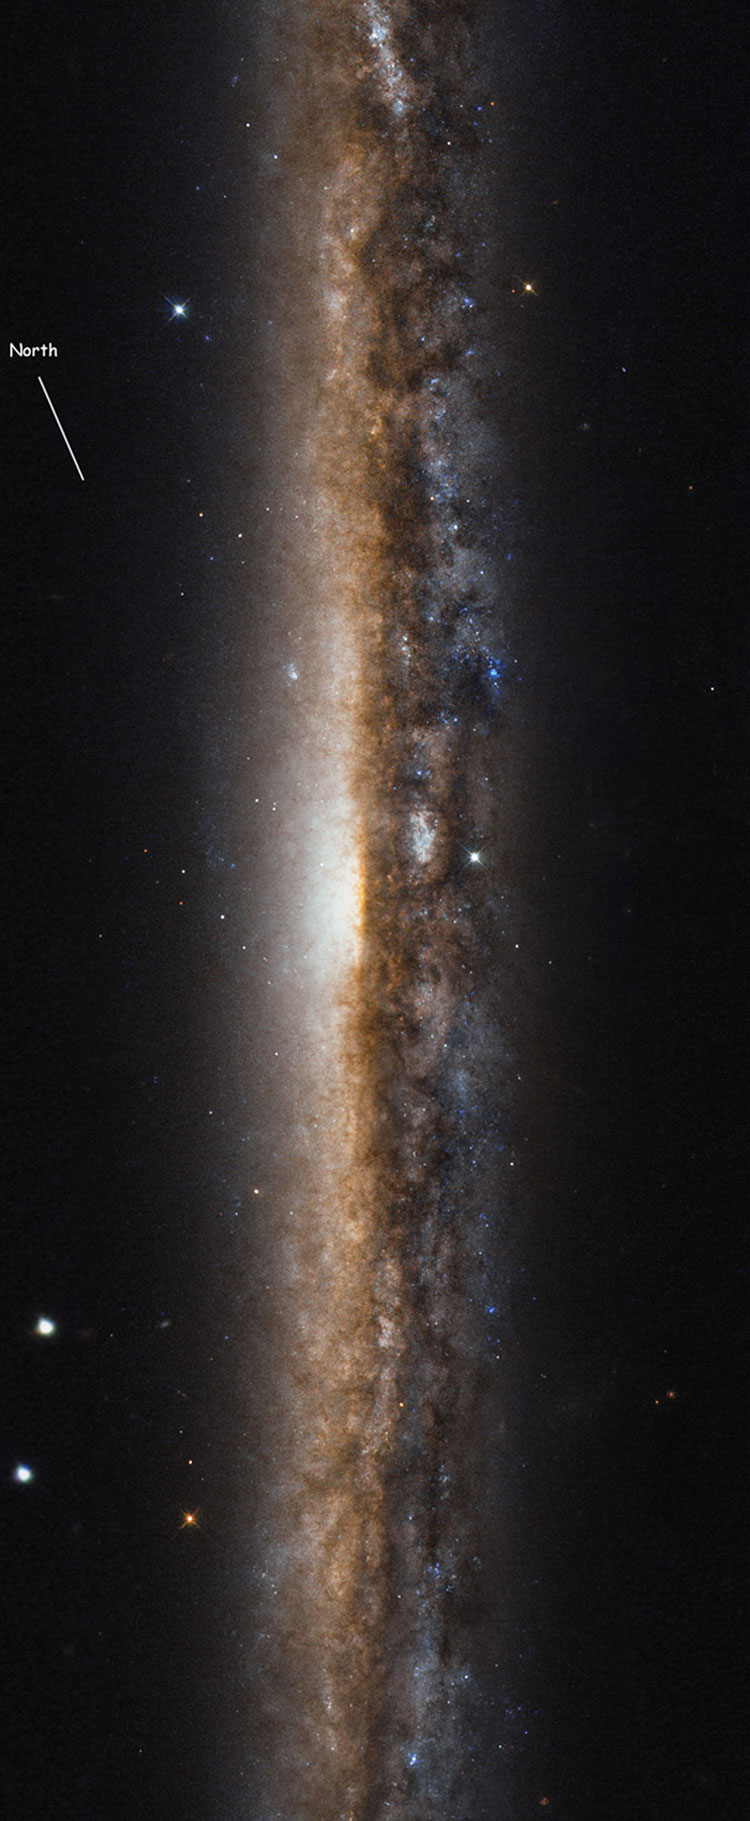 HST image of central part of spiral galaxy NGC 5907